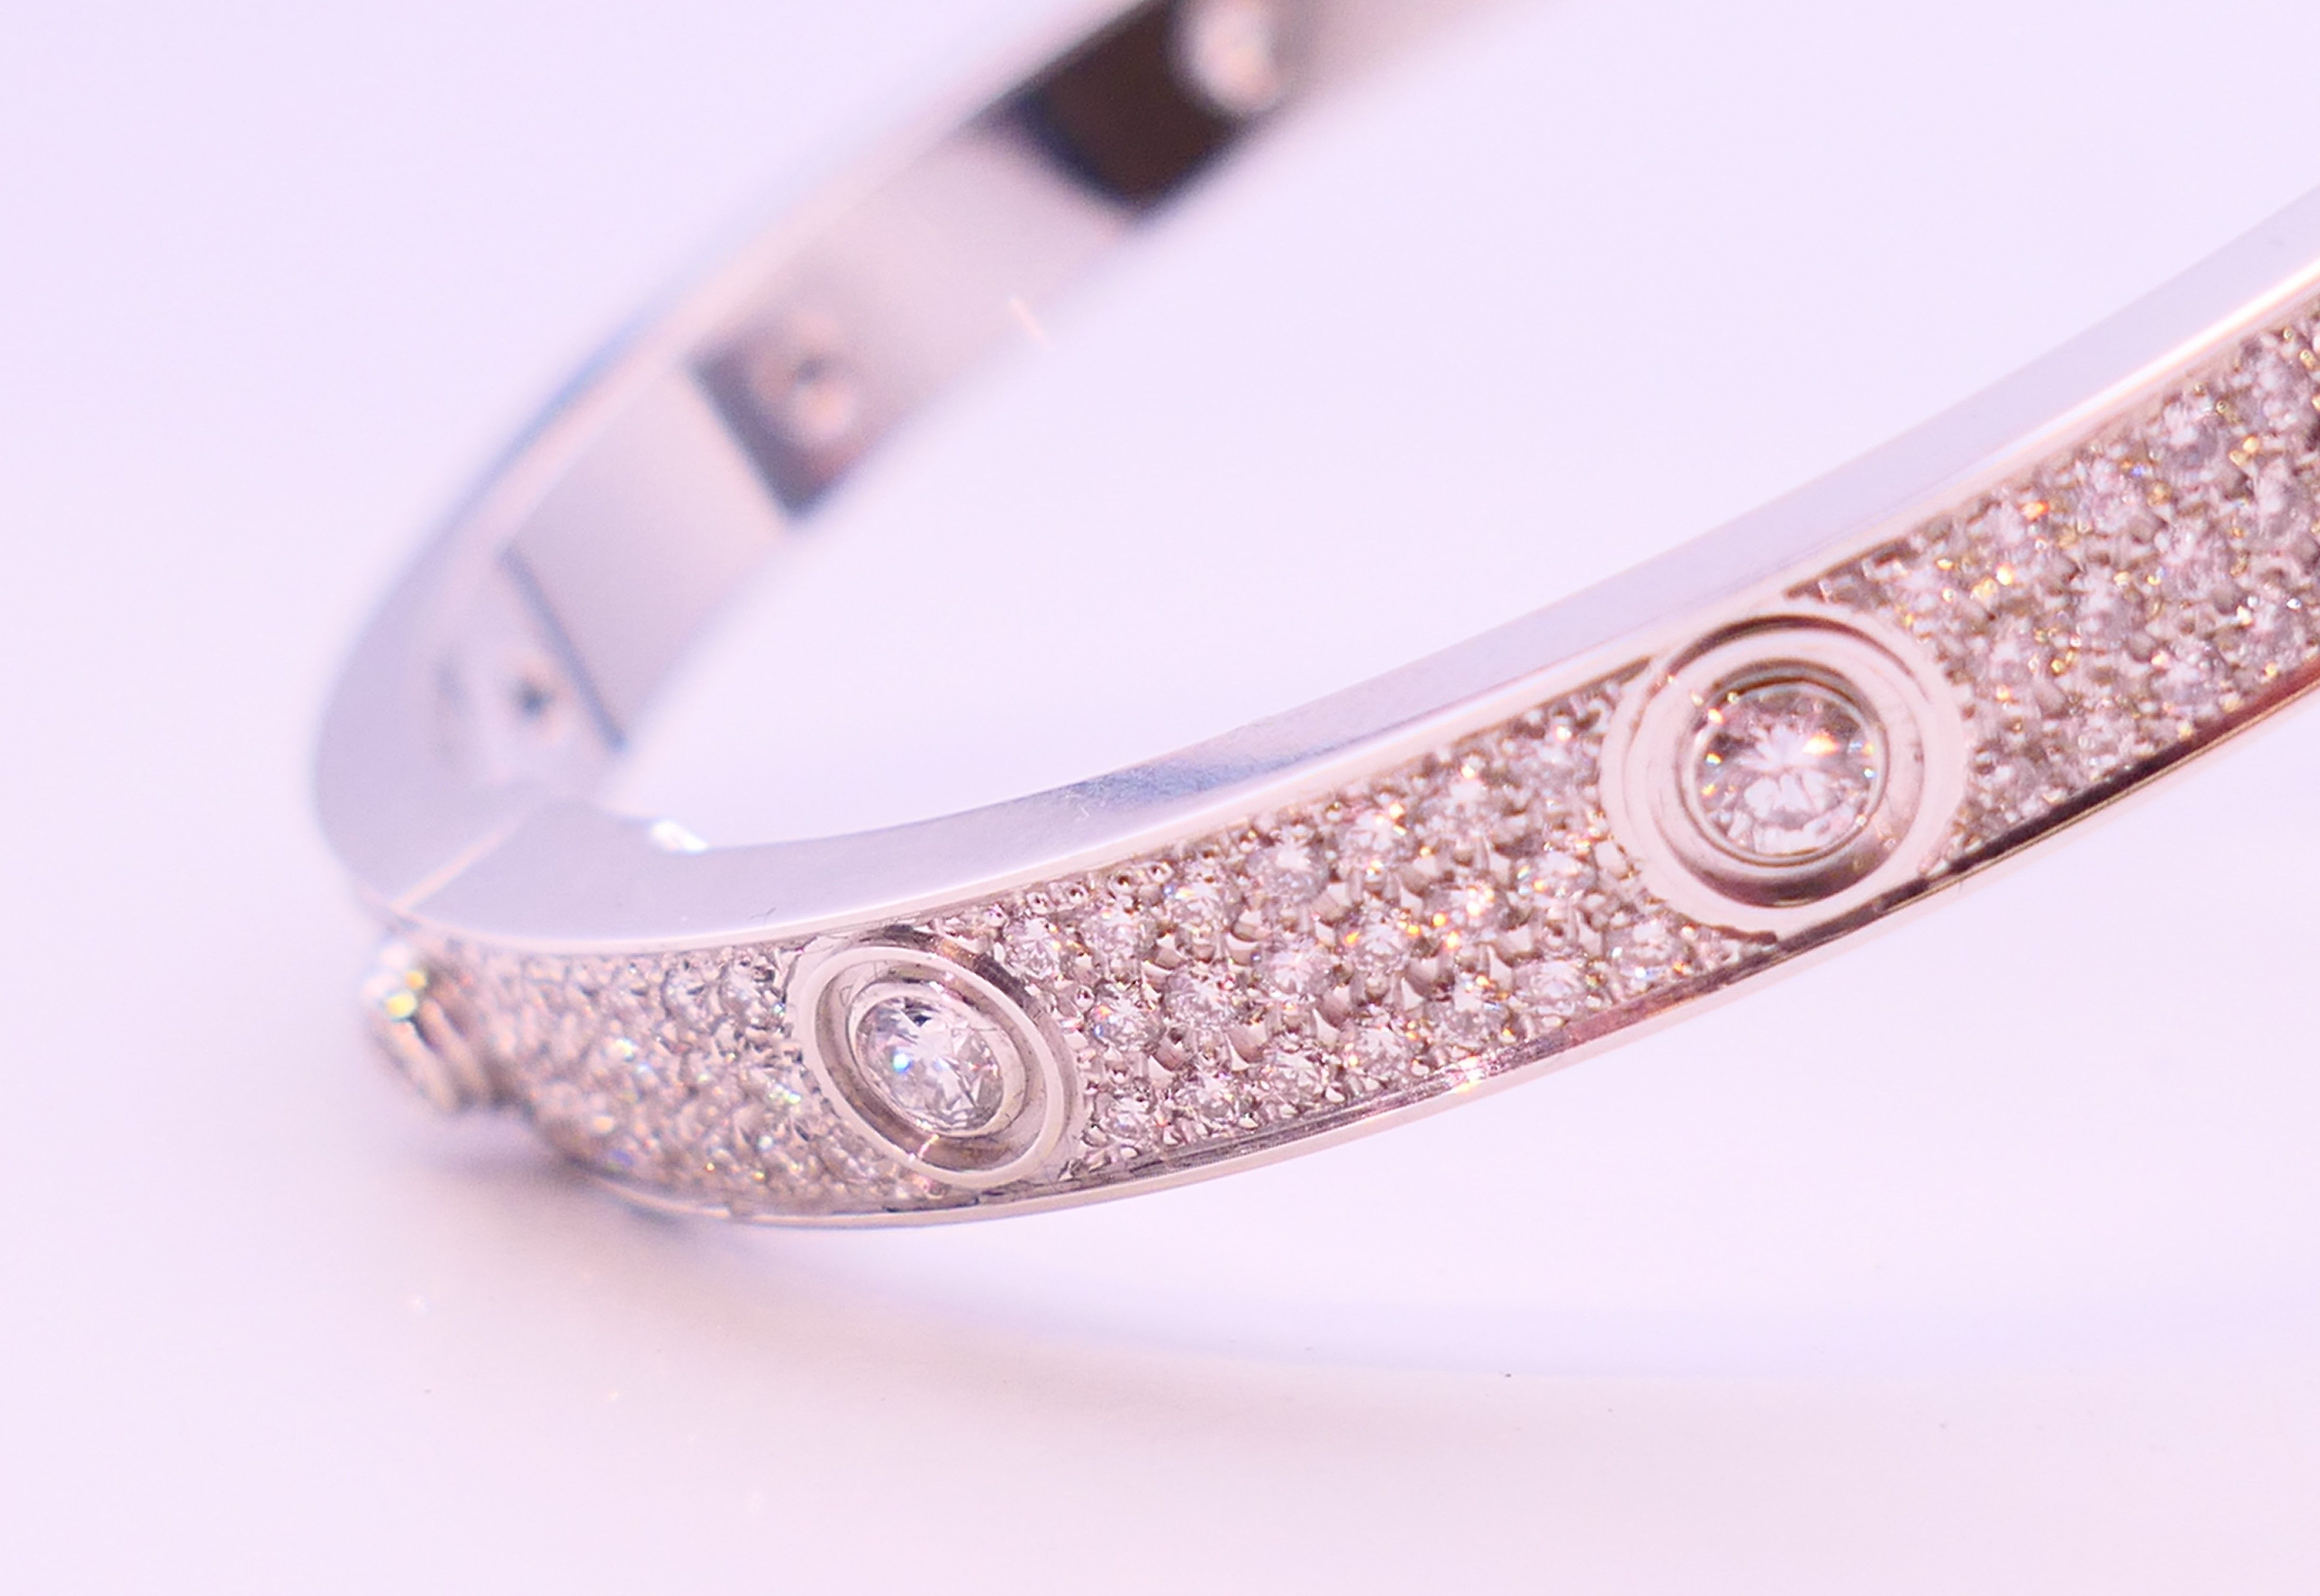 A Cartier 18 K white gold and diamond encrusted love bangle numbered 19 PDR729. 6. - Image 7 of 13